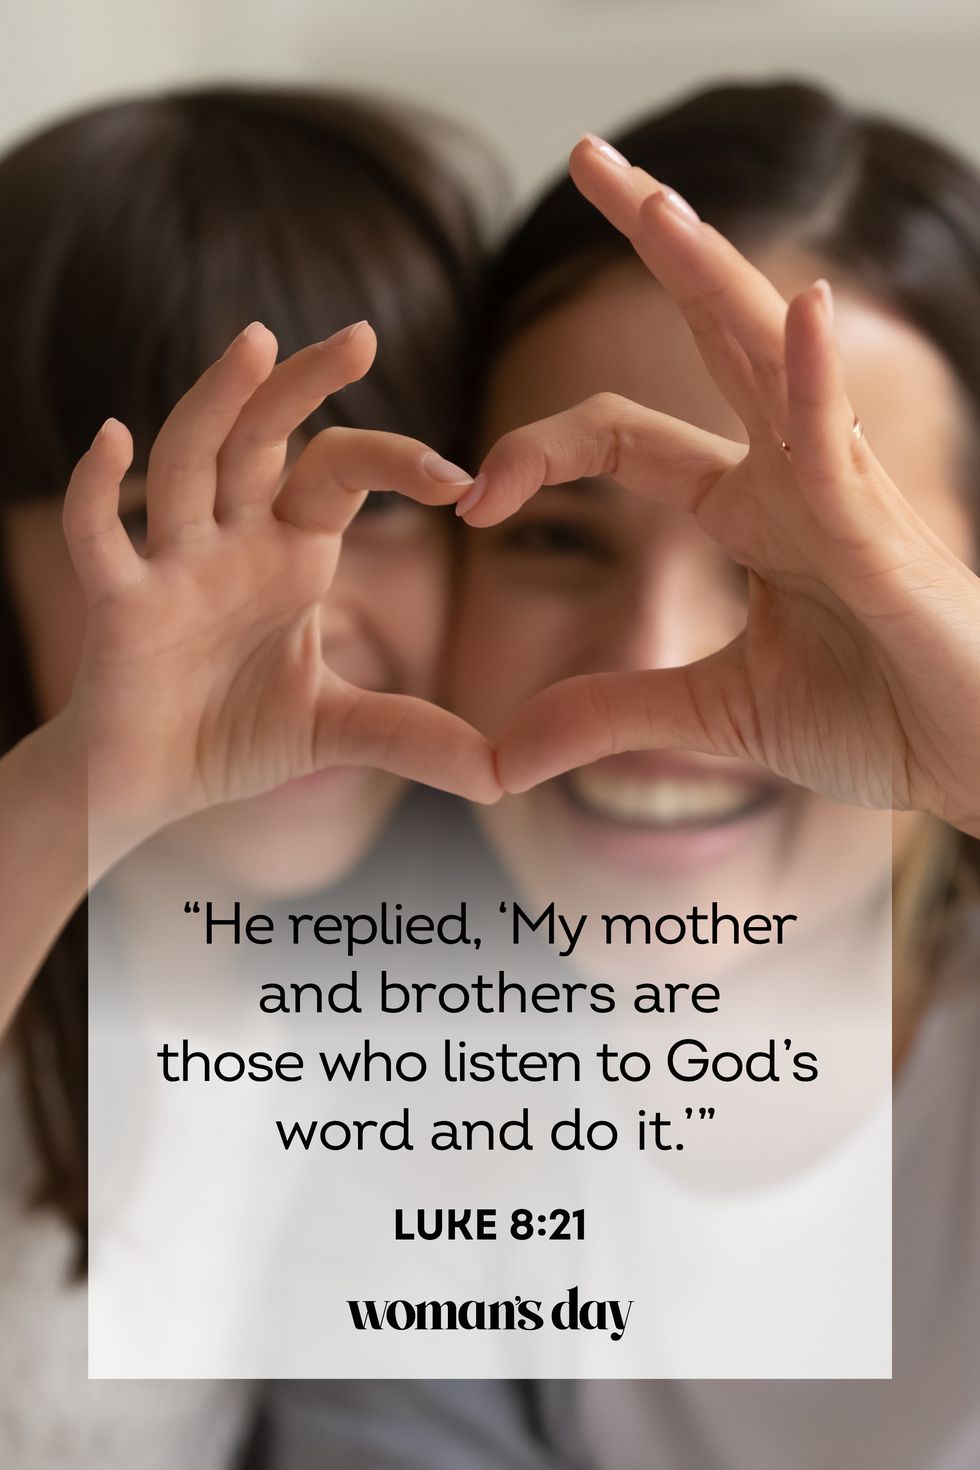 https://hips.hearstapps.com/hmg-prod/images/bible-verses-about-mothers-6436b98aaf843.jpg?crop=1.01xw:1.01xh;0,0&resize=980:*